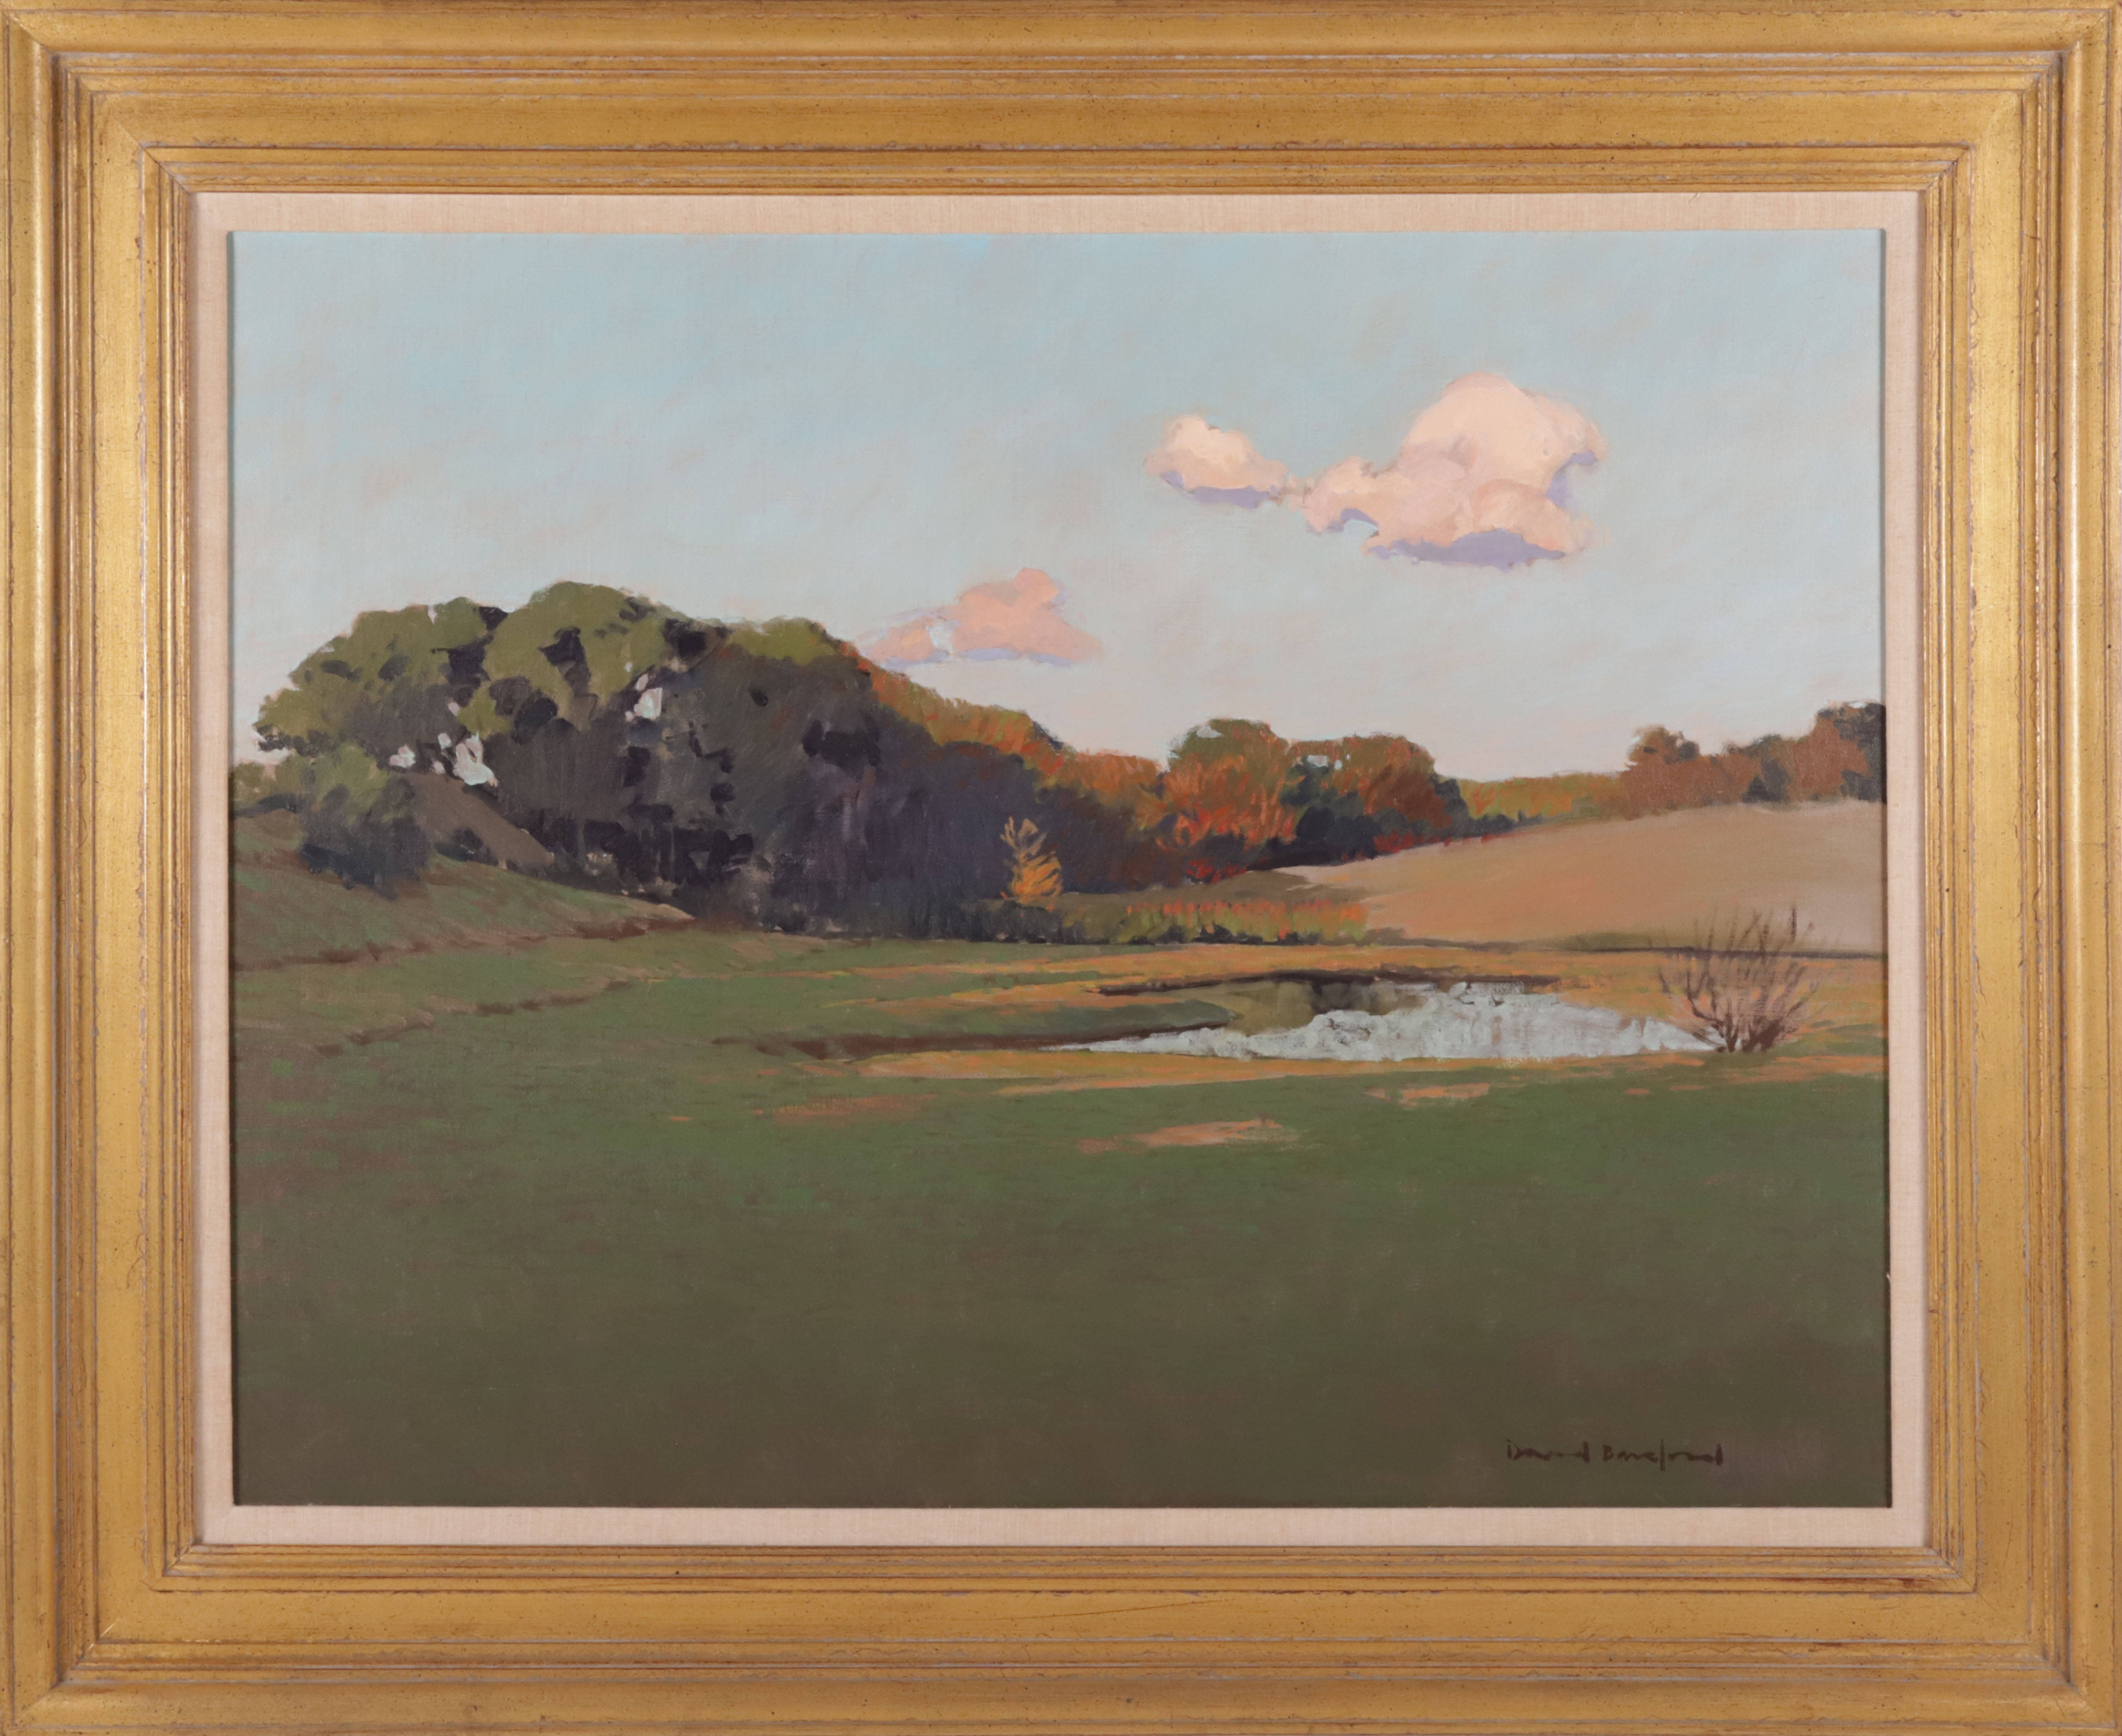 David Bareford Oil on Canvas "Small Pond"